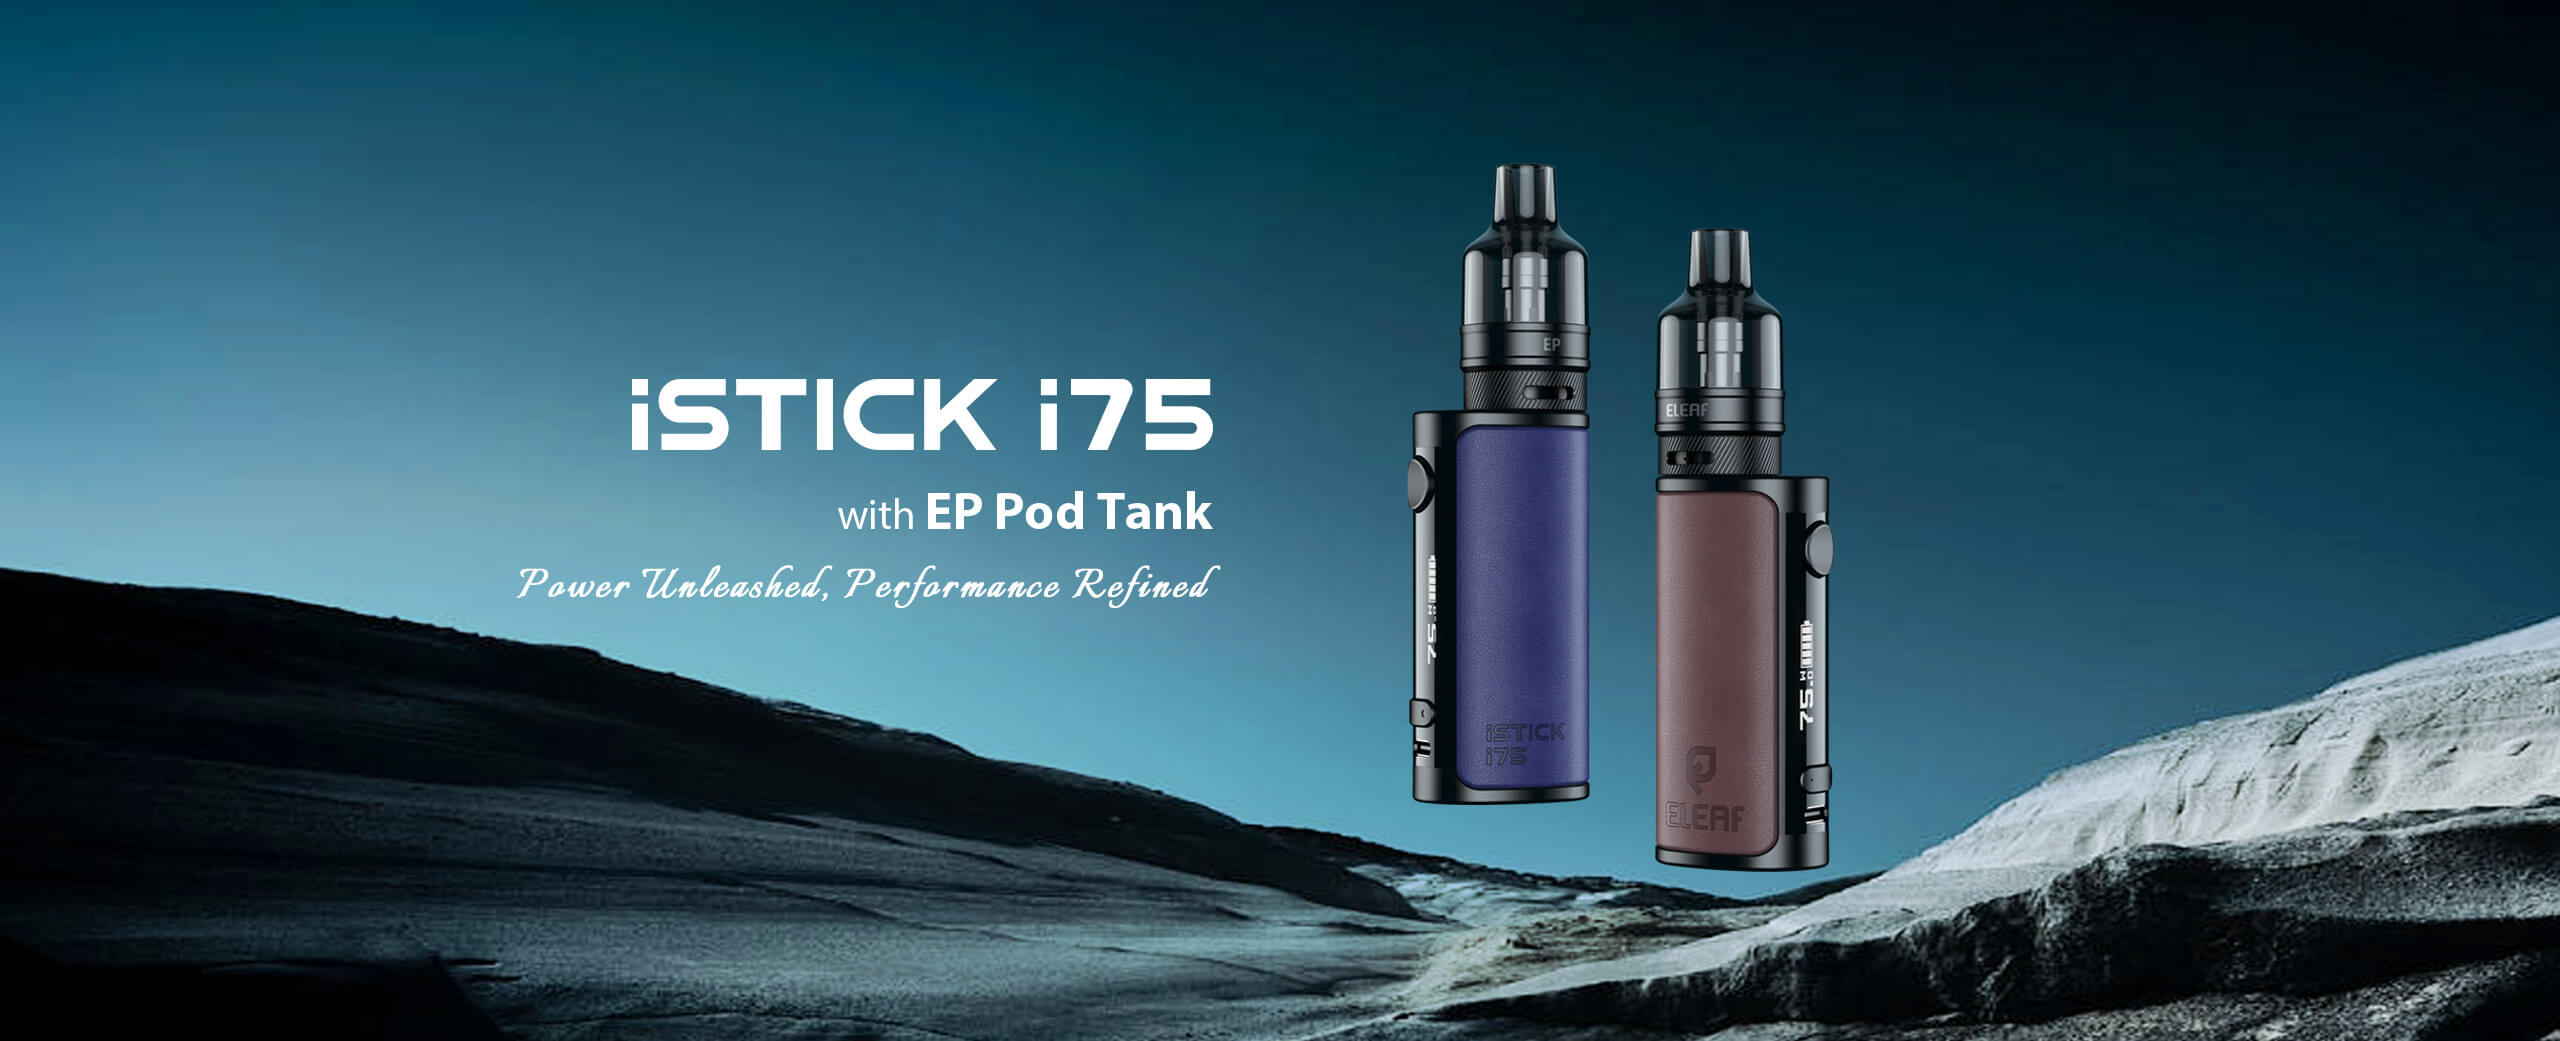 The Eleaf iStick i75 with EP Pod Tank offers a powerful 75W output, a 3000mAh battery for all-day use, and a stylish leather exterior for a great vaping experience.